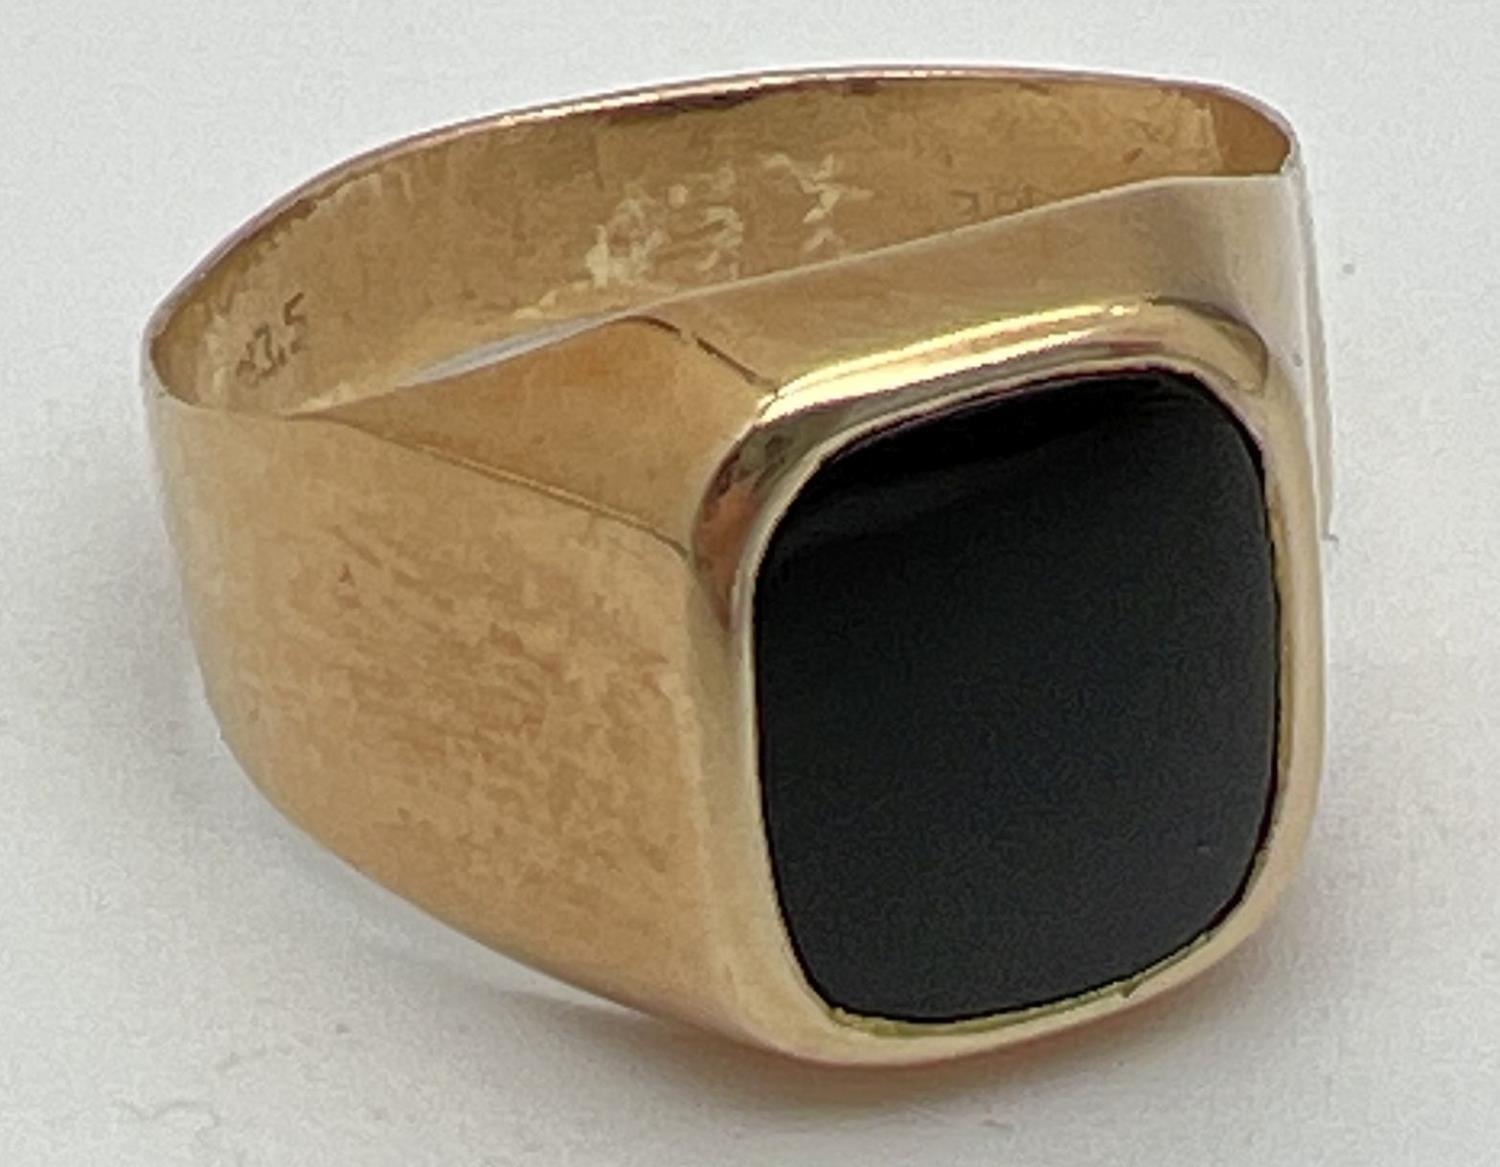 A men's 20ct gold and black onyx signet ring, band slightly misshapen. Stamped 83.5 inside band.